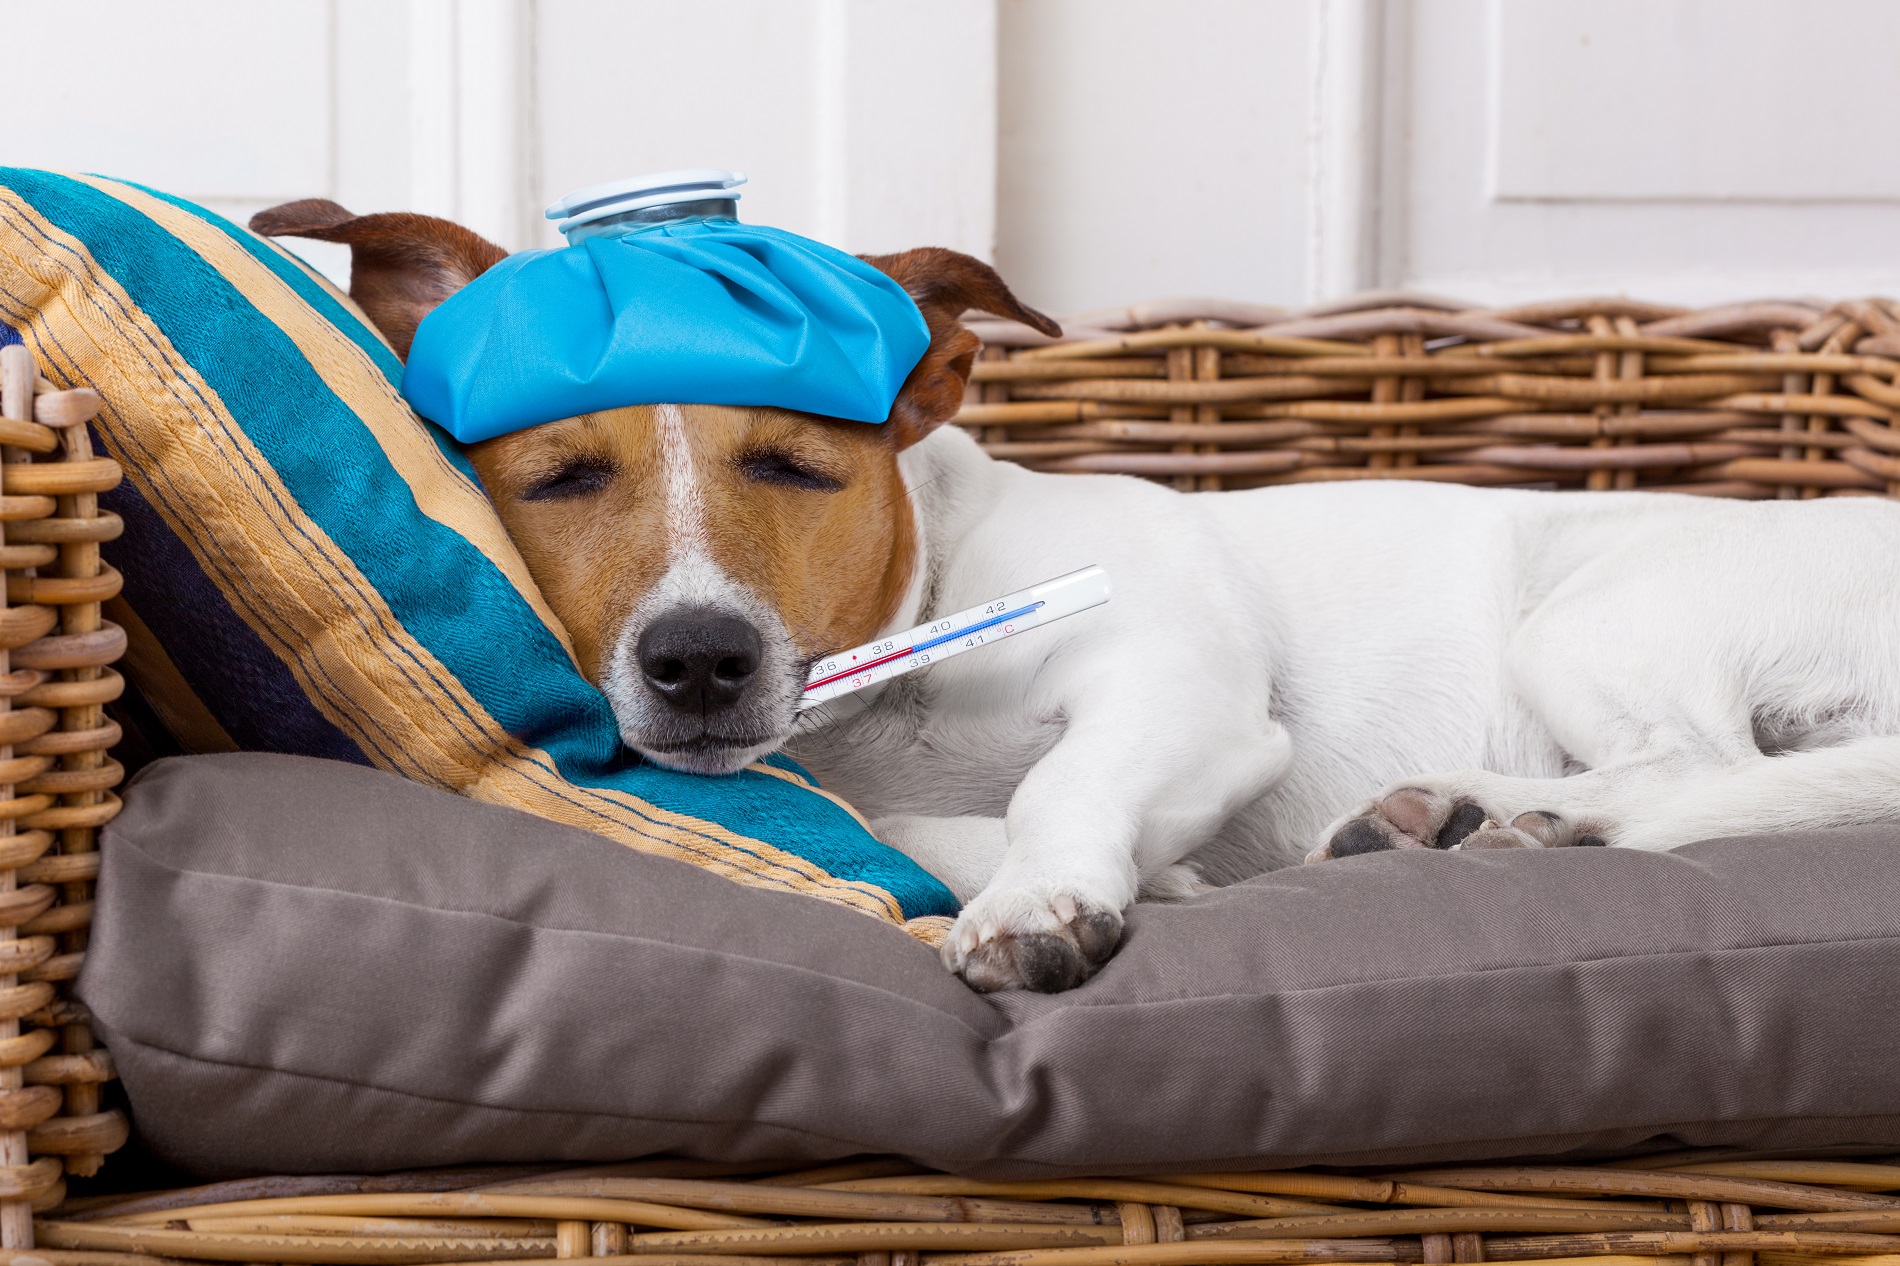 How to Take a Dog's Temperature Without Using a Thermometer